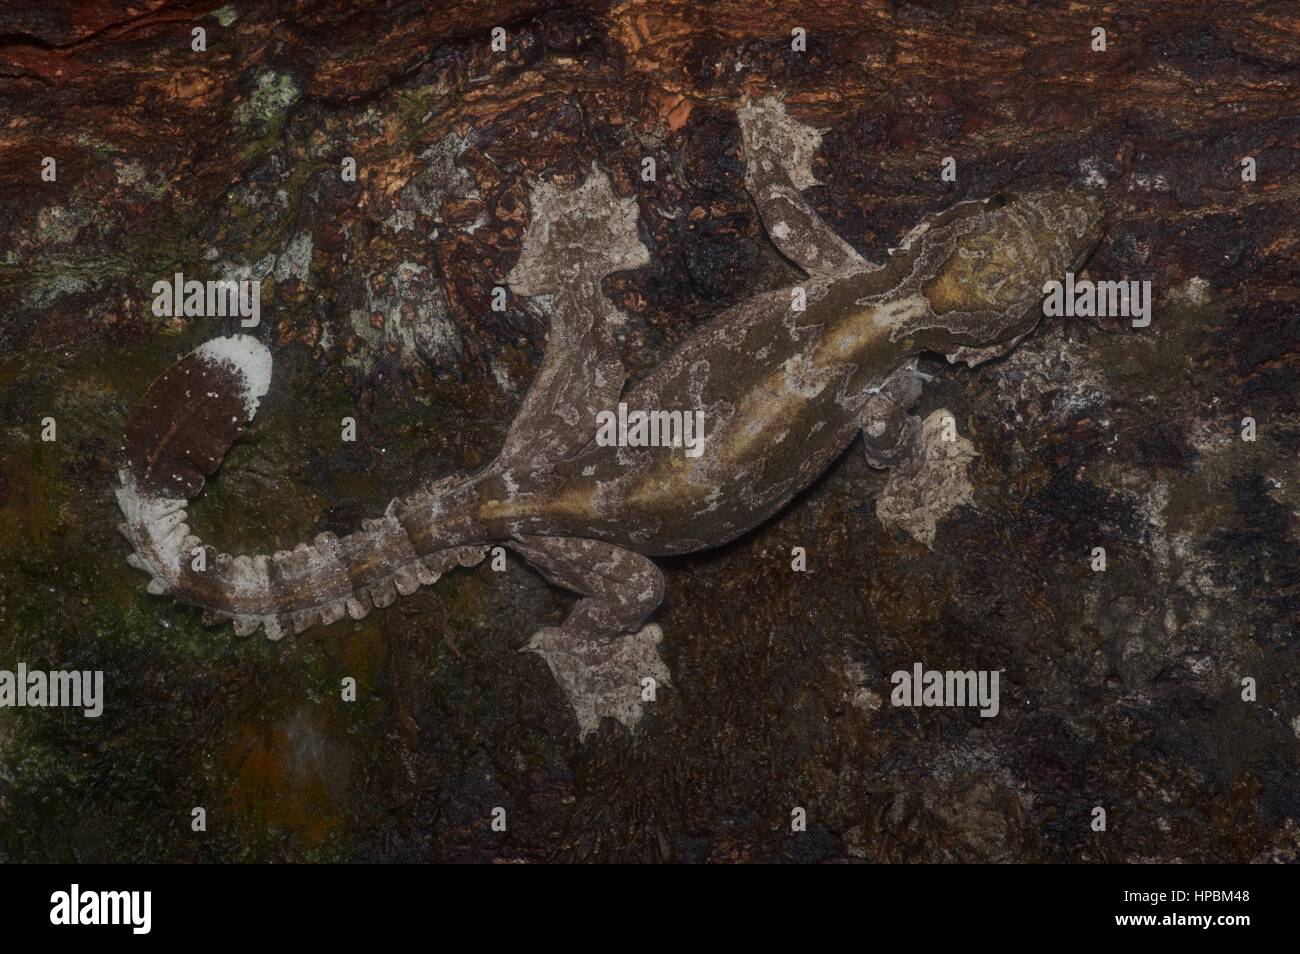 A Kuhl's Flying Gecko (Ptychozoon kuhli) camouflaged on a log in the Malaysian rainforest at night Stock Photo